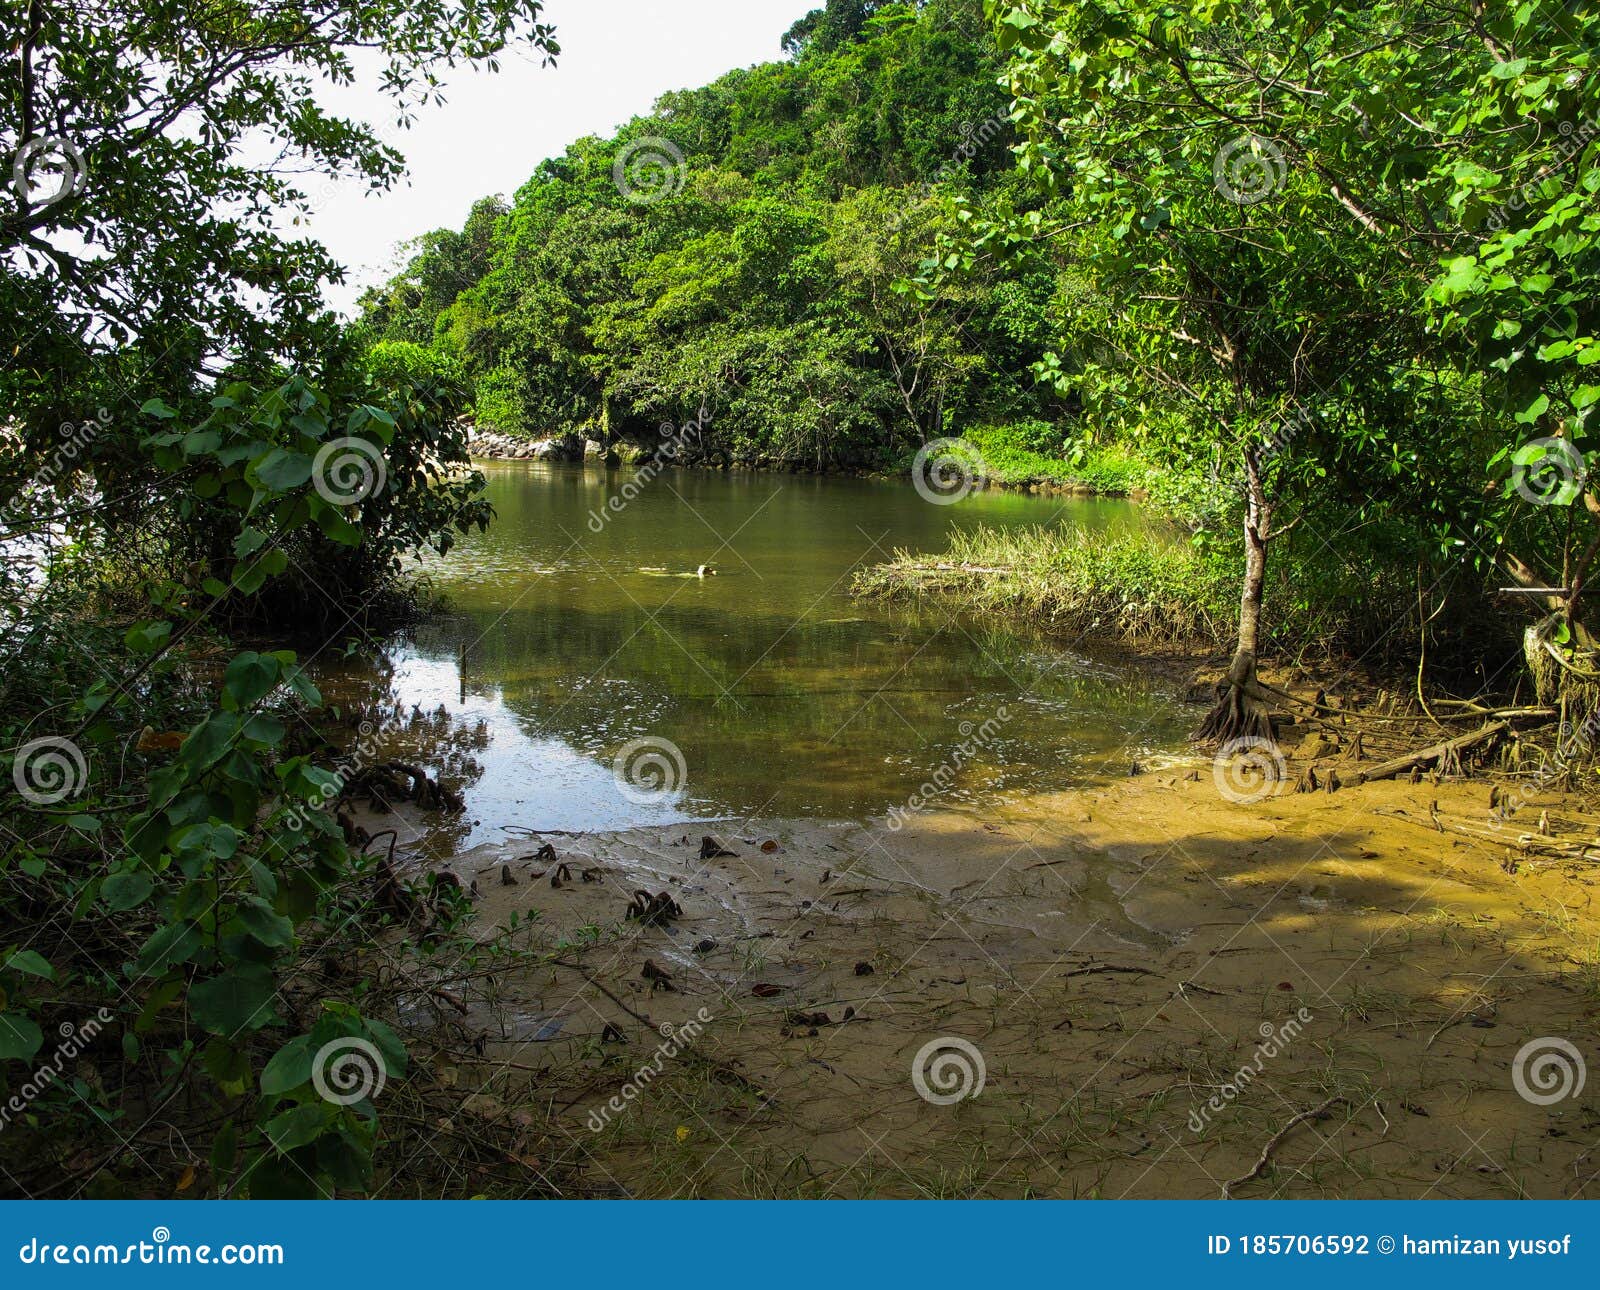 Flora and Fauna in Mangrove Area Stock Photo - Image of blooming ...